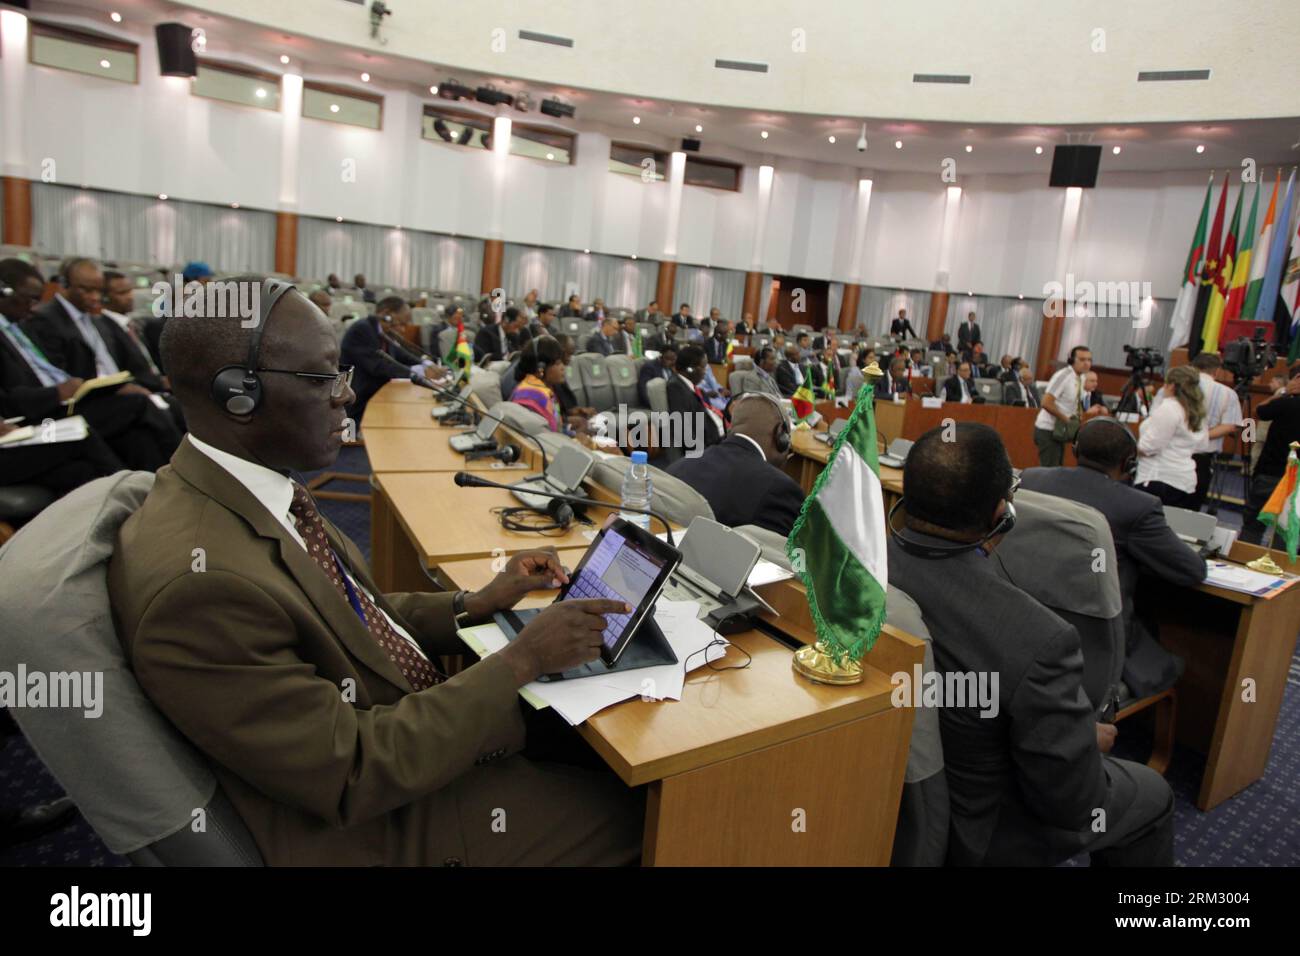 Bildnummer: 59919629  Datum: 29.06.2013  Copyright: imago/Xinhua (130629) -- ALGIERS, June 29, 2013 (Xinhua) -- Representatives of the four core countries (Algeria, Mali, Mauritania and Niger) participate in the Ministerial meeting of the African Union s Peace and Security Council, which kicks off at the Palace of Nations in Algiers, Algeria, on June 29, 2013. The meeting was organized to assess the situation in the region, particularly in Mali, and to express the determination to continue the fight against terrorism and transnational organized crime in the Sahel region. (Xinhua/Mohamed Kadri) Stock Photo